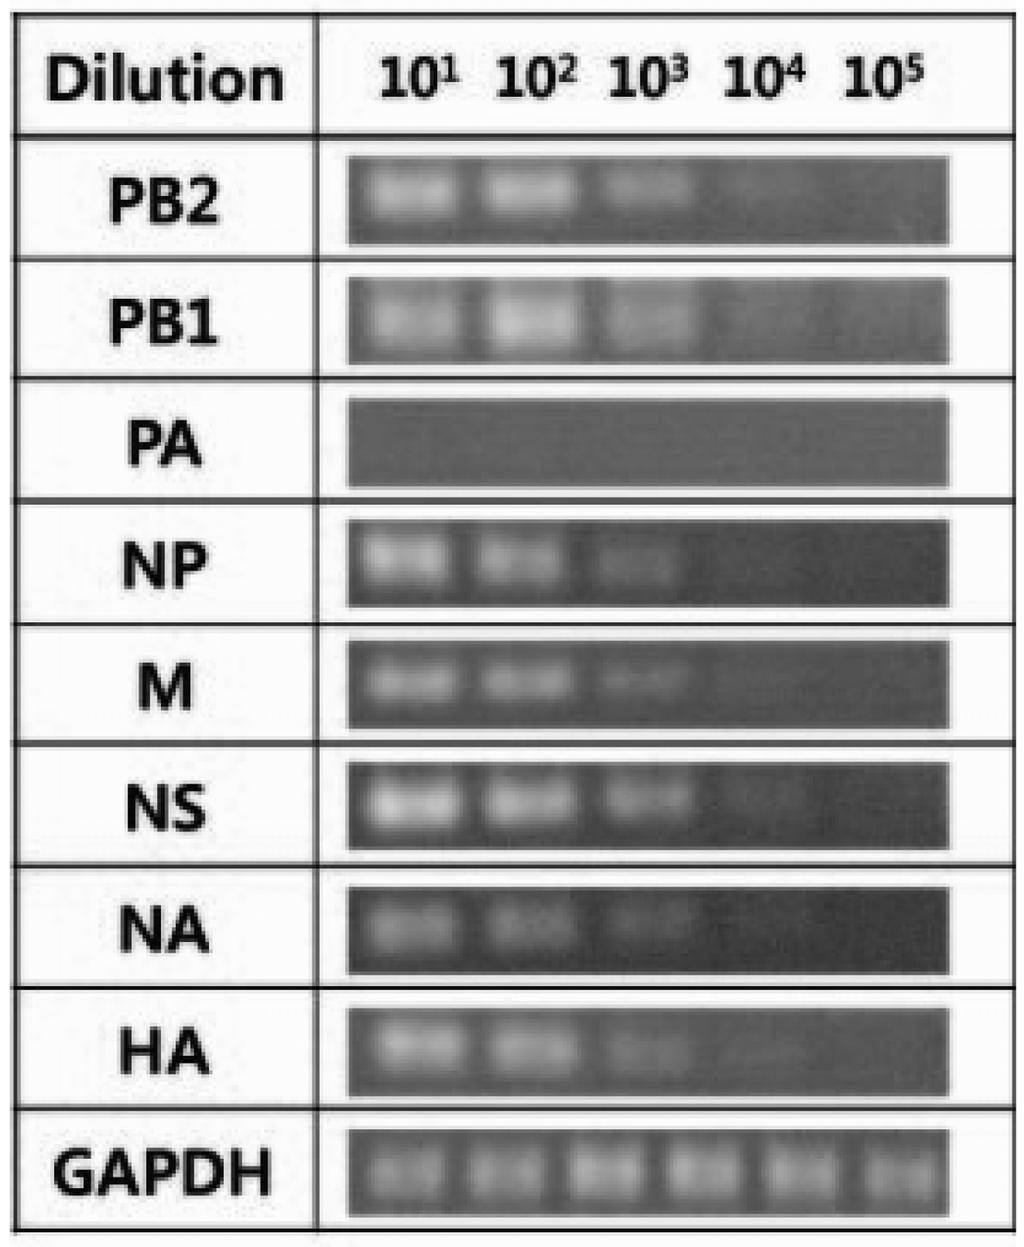 Culture medium was taken at indicated time pointes after infection and mixed with mouse total RNA as carrier used for viral RNA isolation.